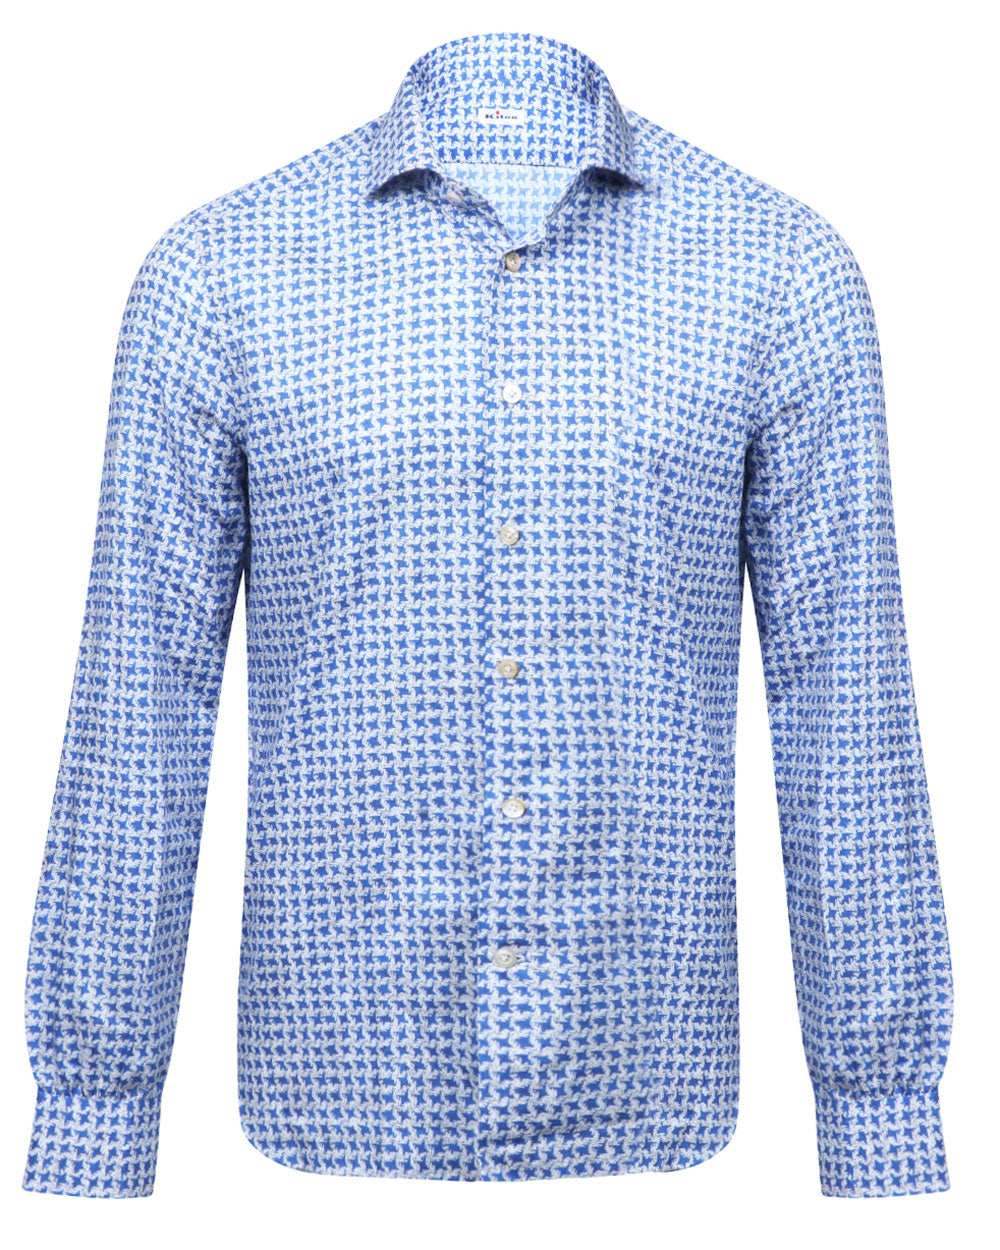 Blue and Ivory Houndstooth Sportshirt